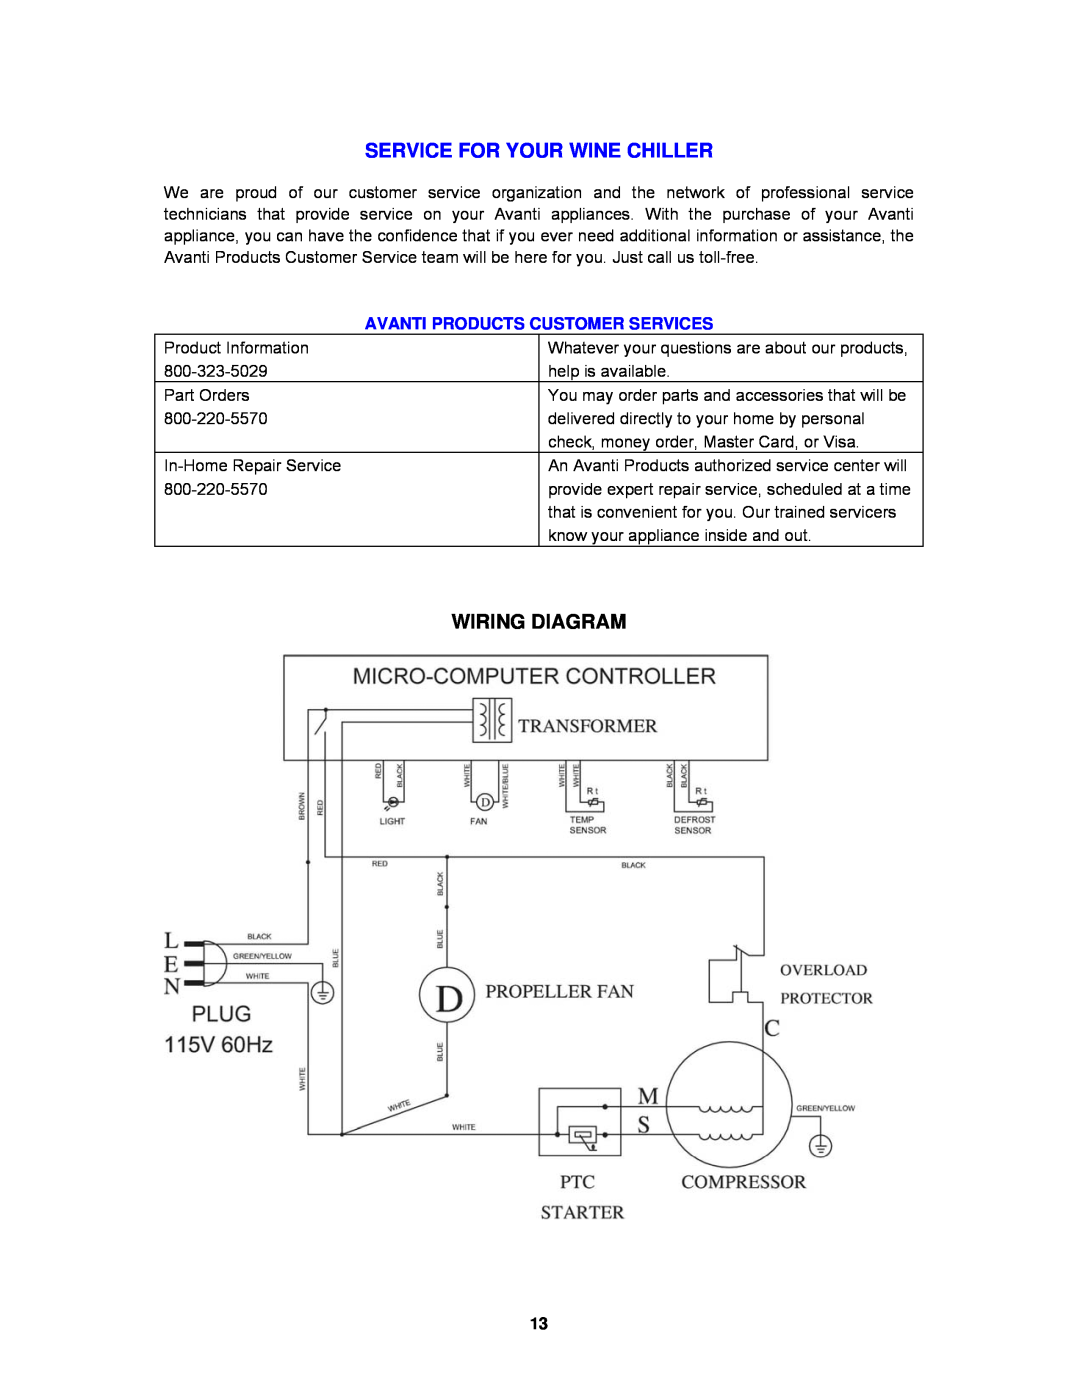 Avanti WCR9000S instruction manual Service For Your Wine Chiller, Wiring Diagram, Avanti Products Customer Services 